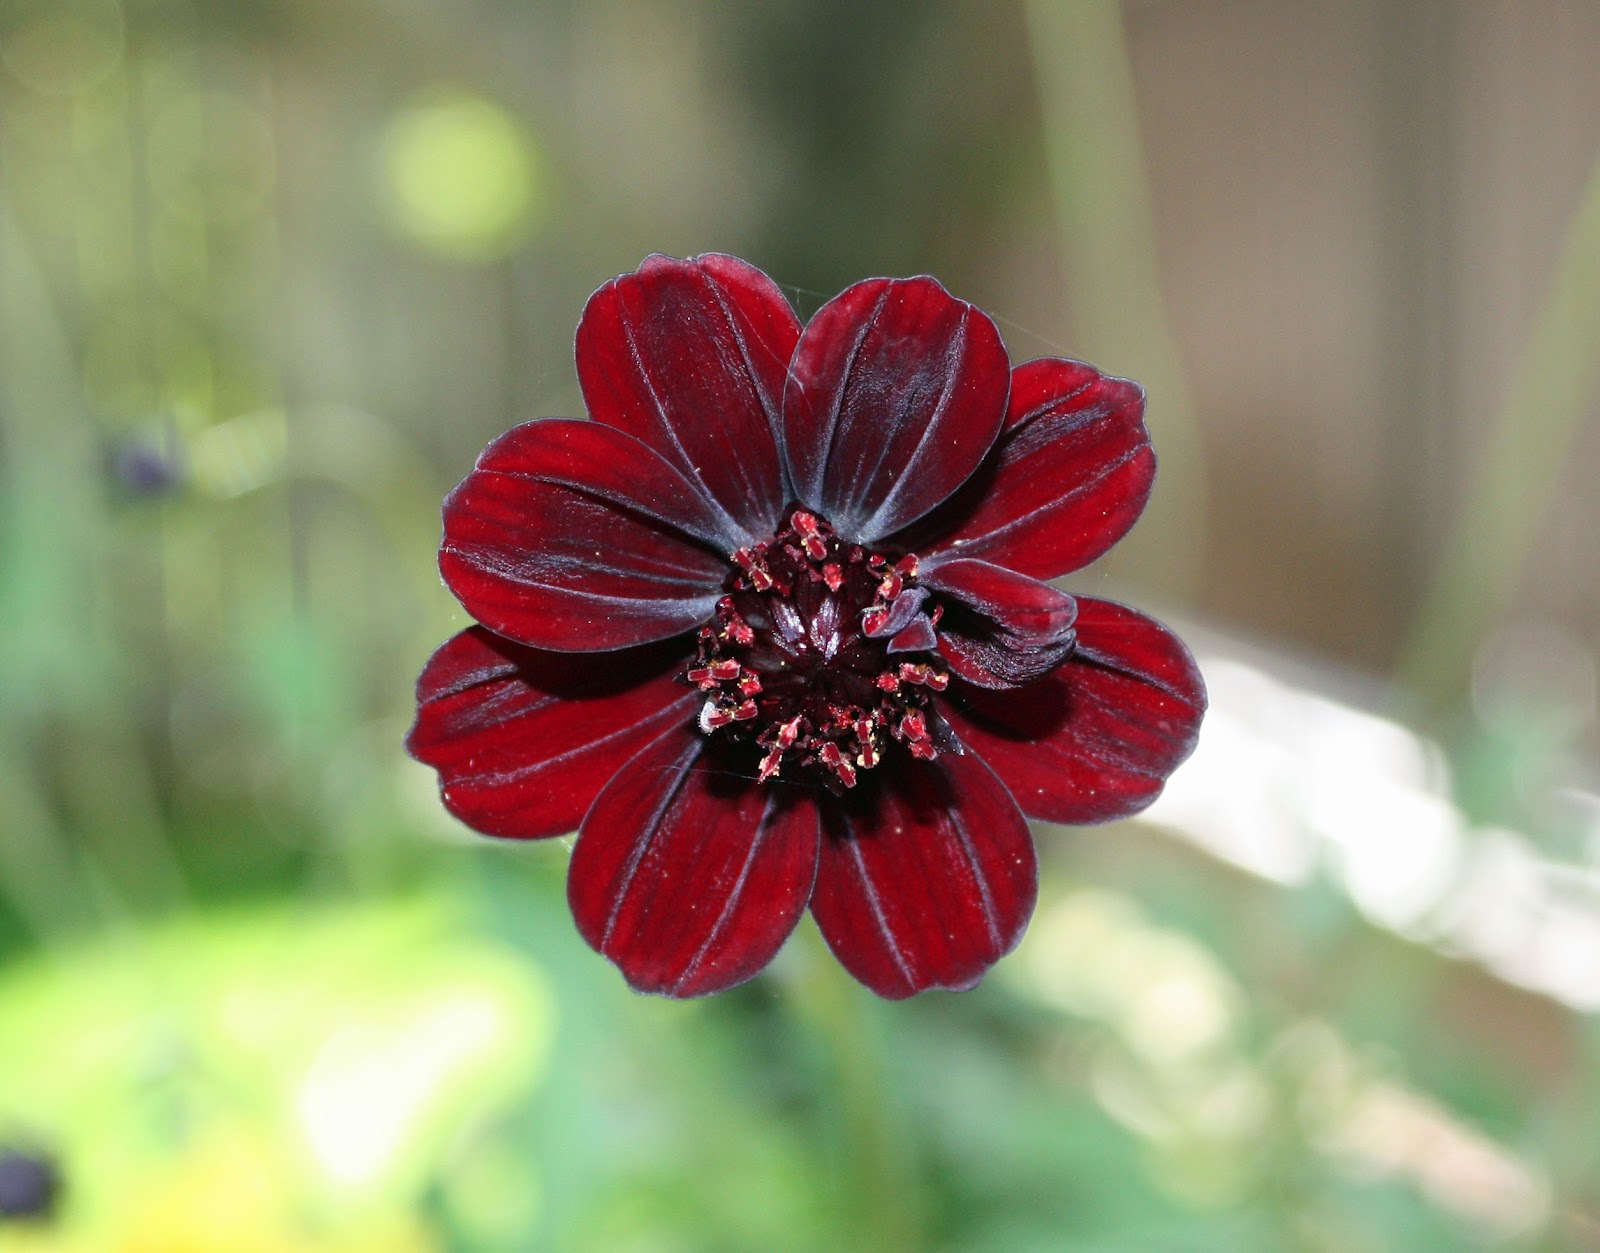 Pictures Of Chocolate Cosmos